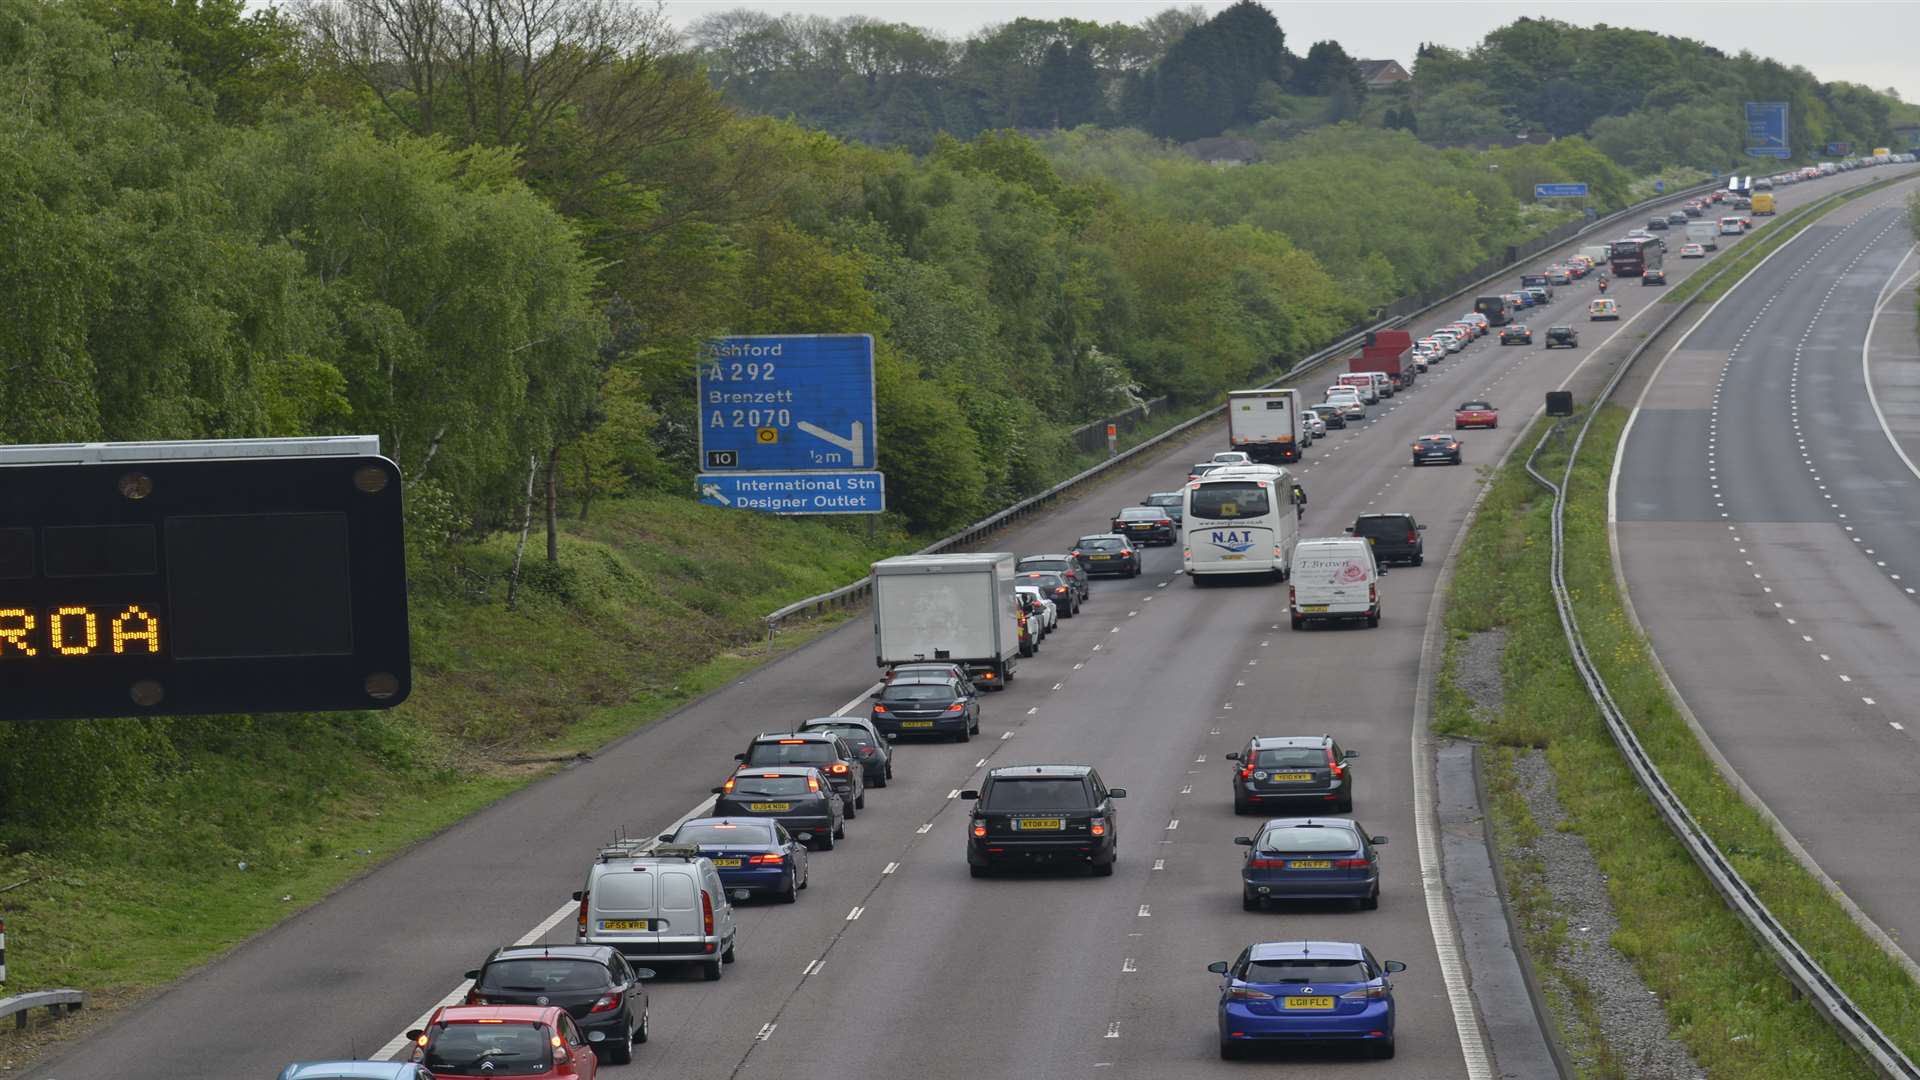 The M20 between junction 9 and 10 at Ashford.